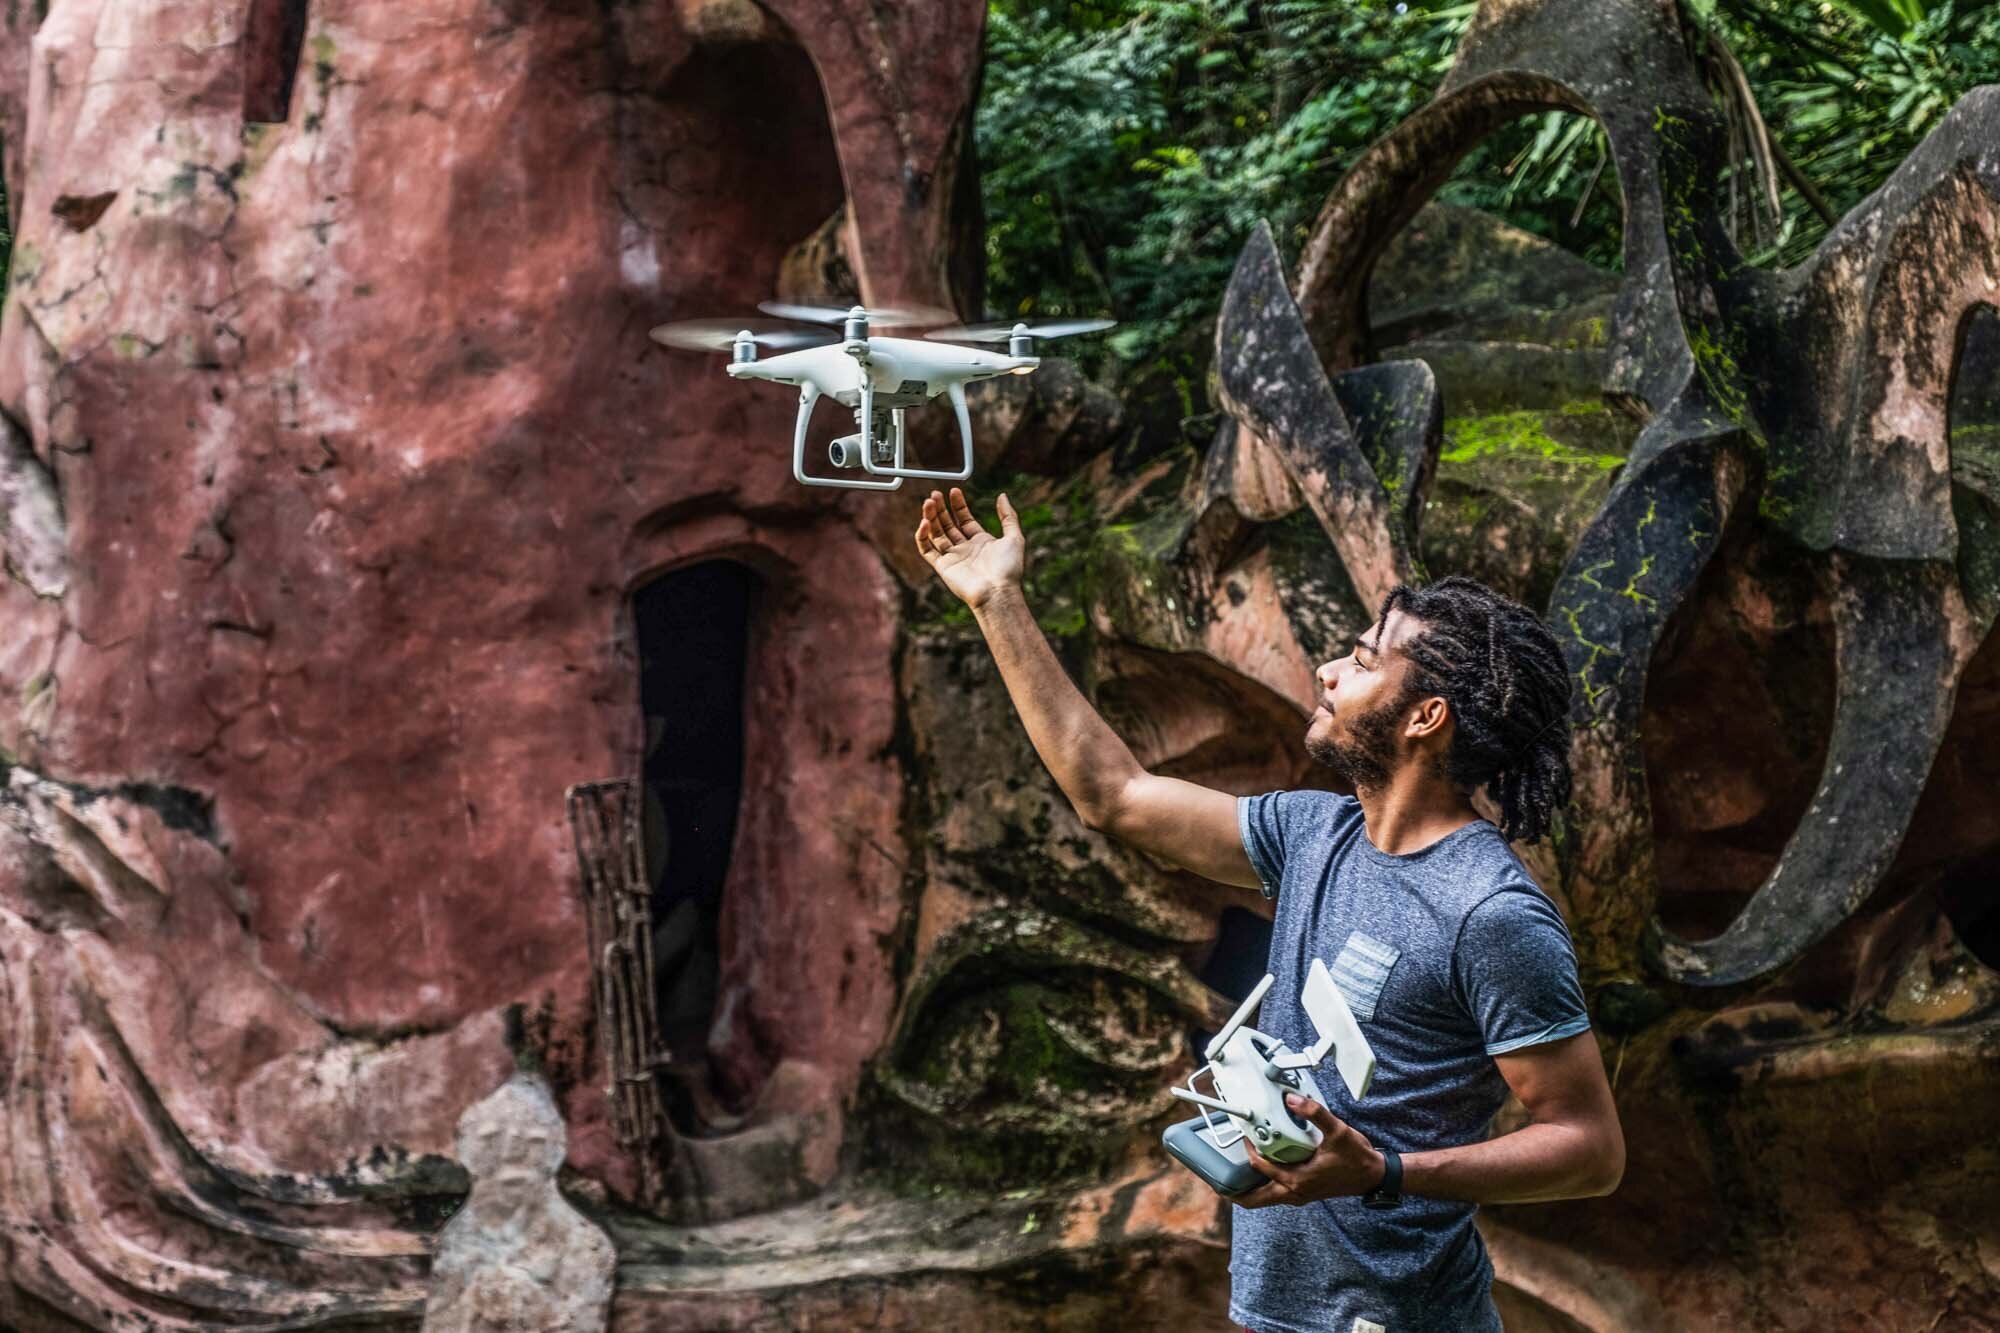  For this project drones, laser scanners and DSLR cameras were used to document three shrines at the site.  